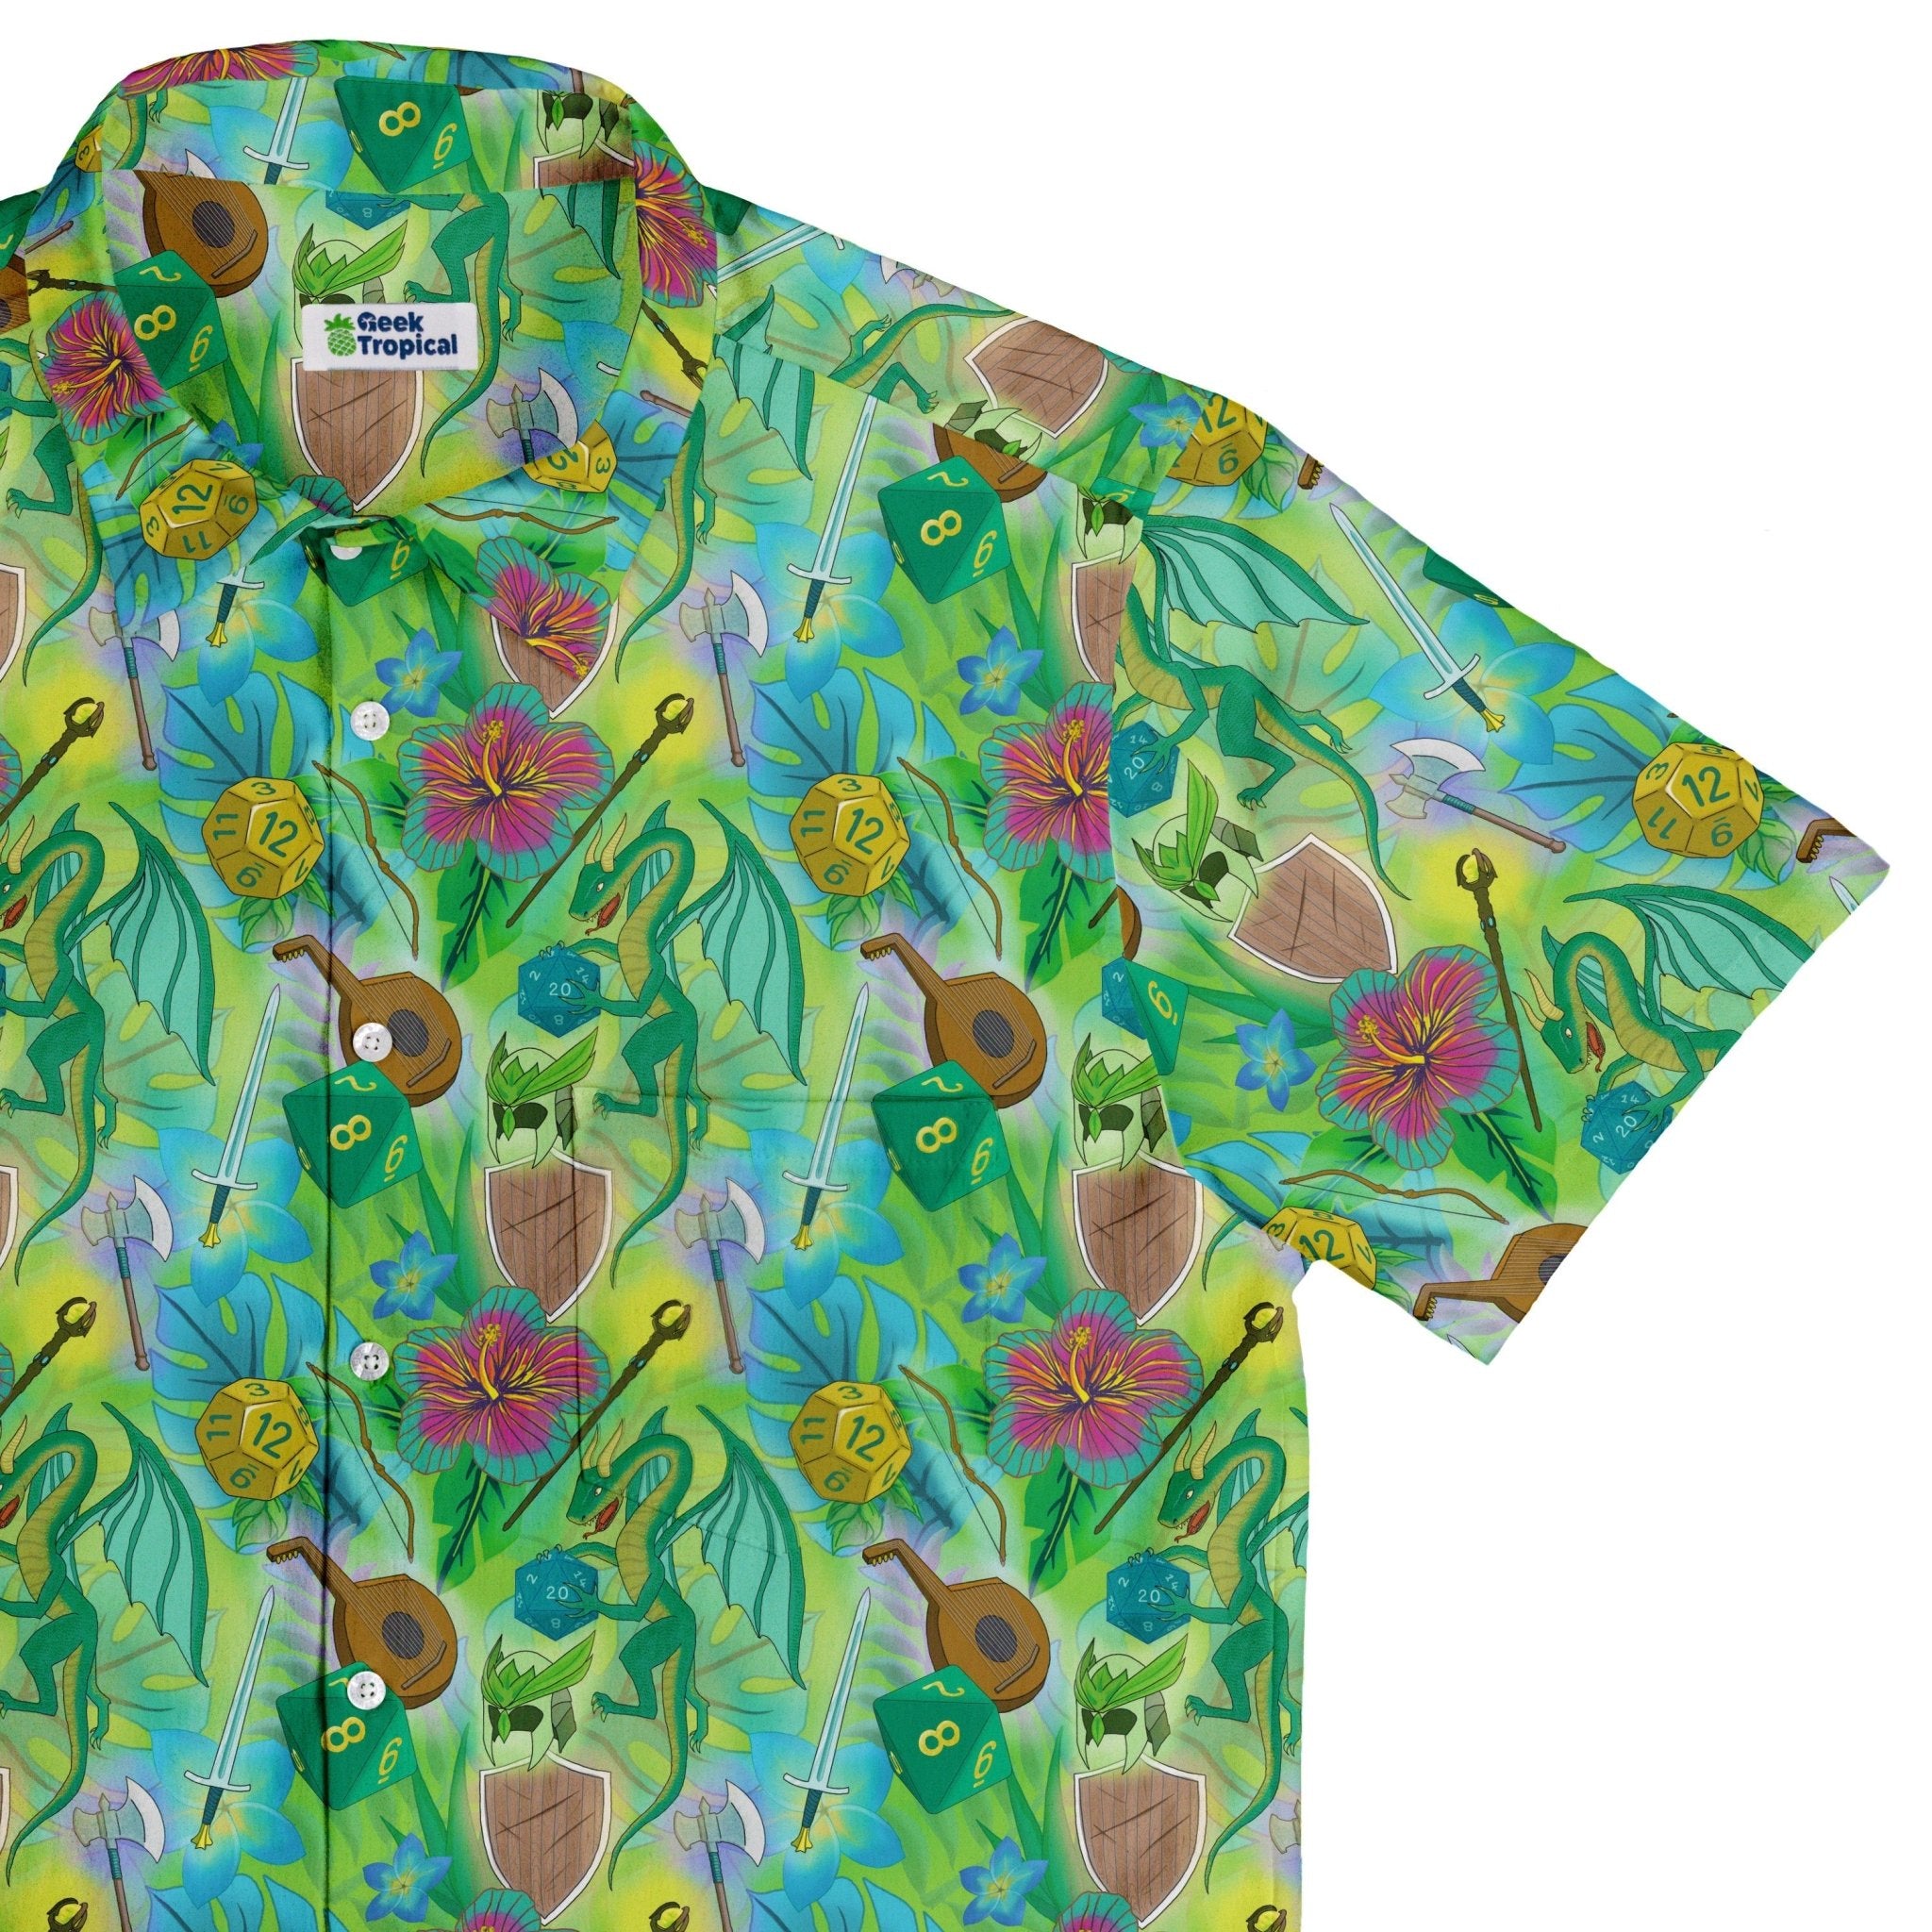 Green Dragon Encounter Dnd Button Up Shirt - adult sizing - Animal Patterns - Designs by Nathan